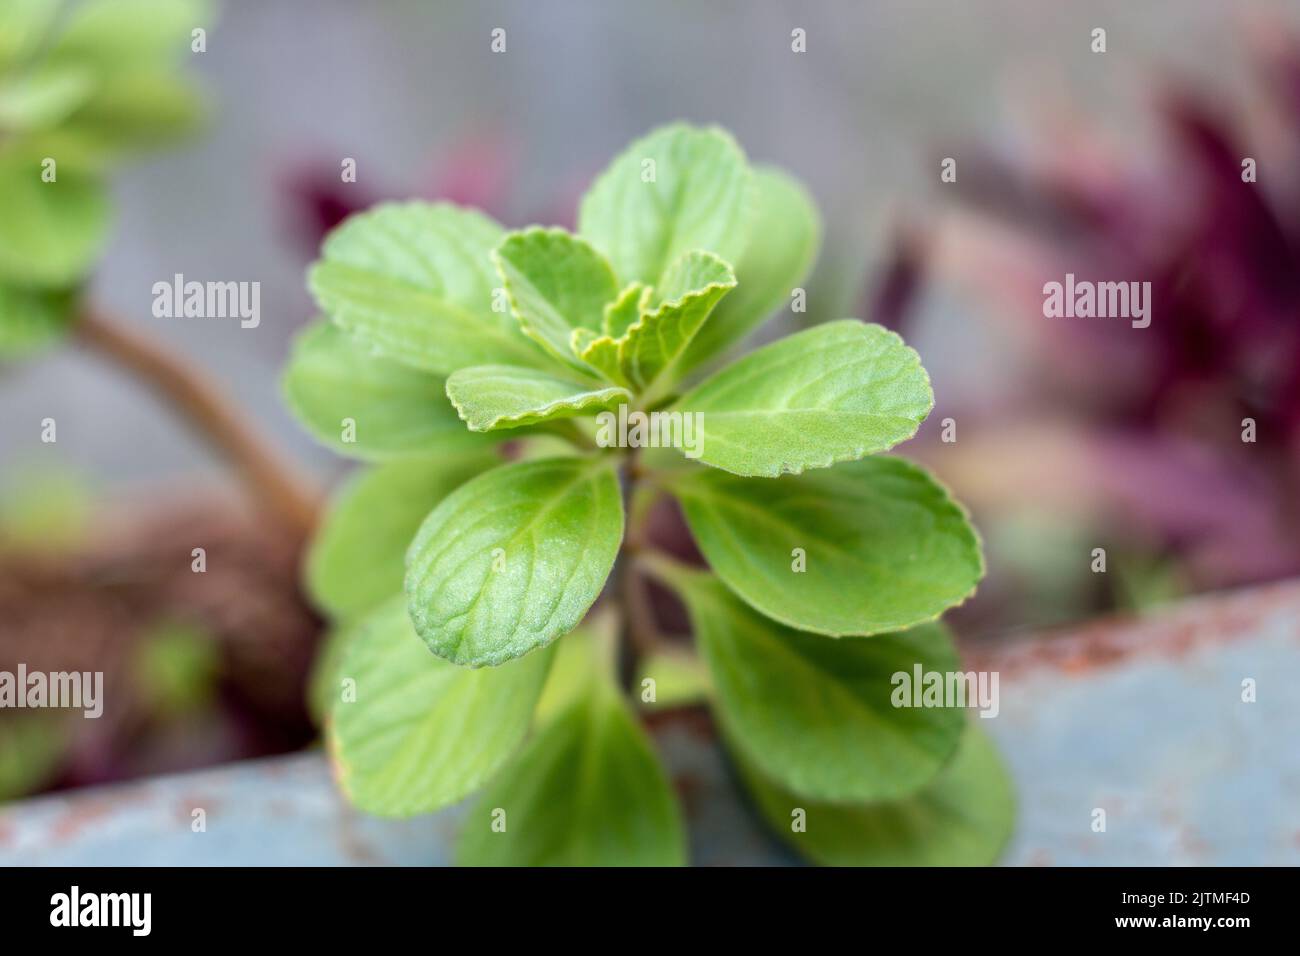 plant known as boldo, widely used for tea, in Brazil. Stock Photo